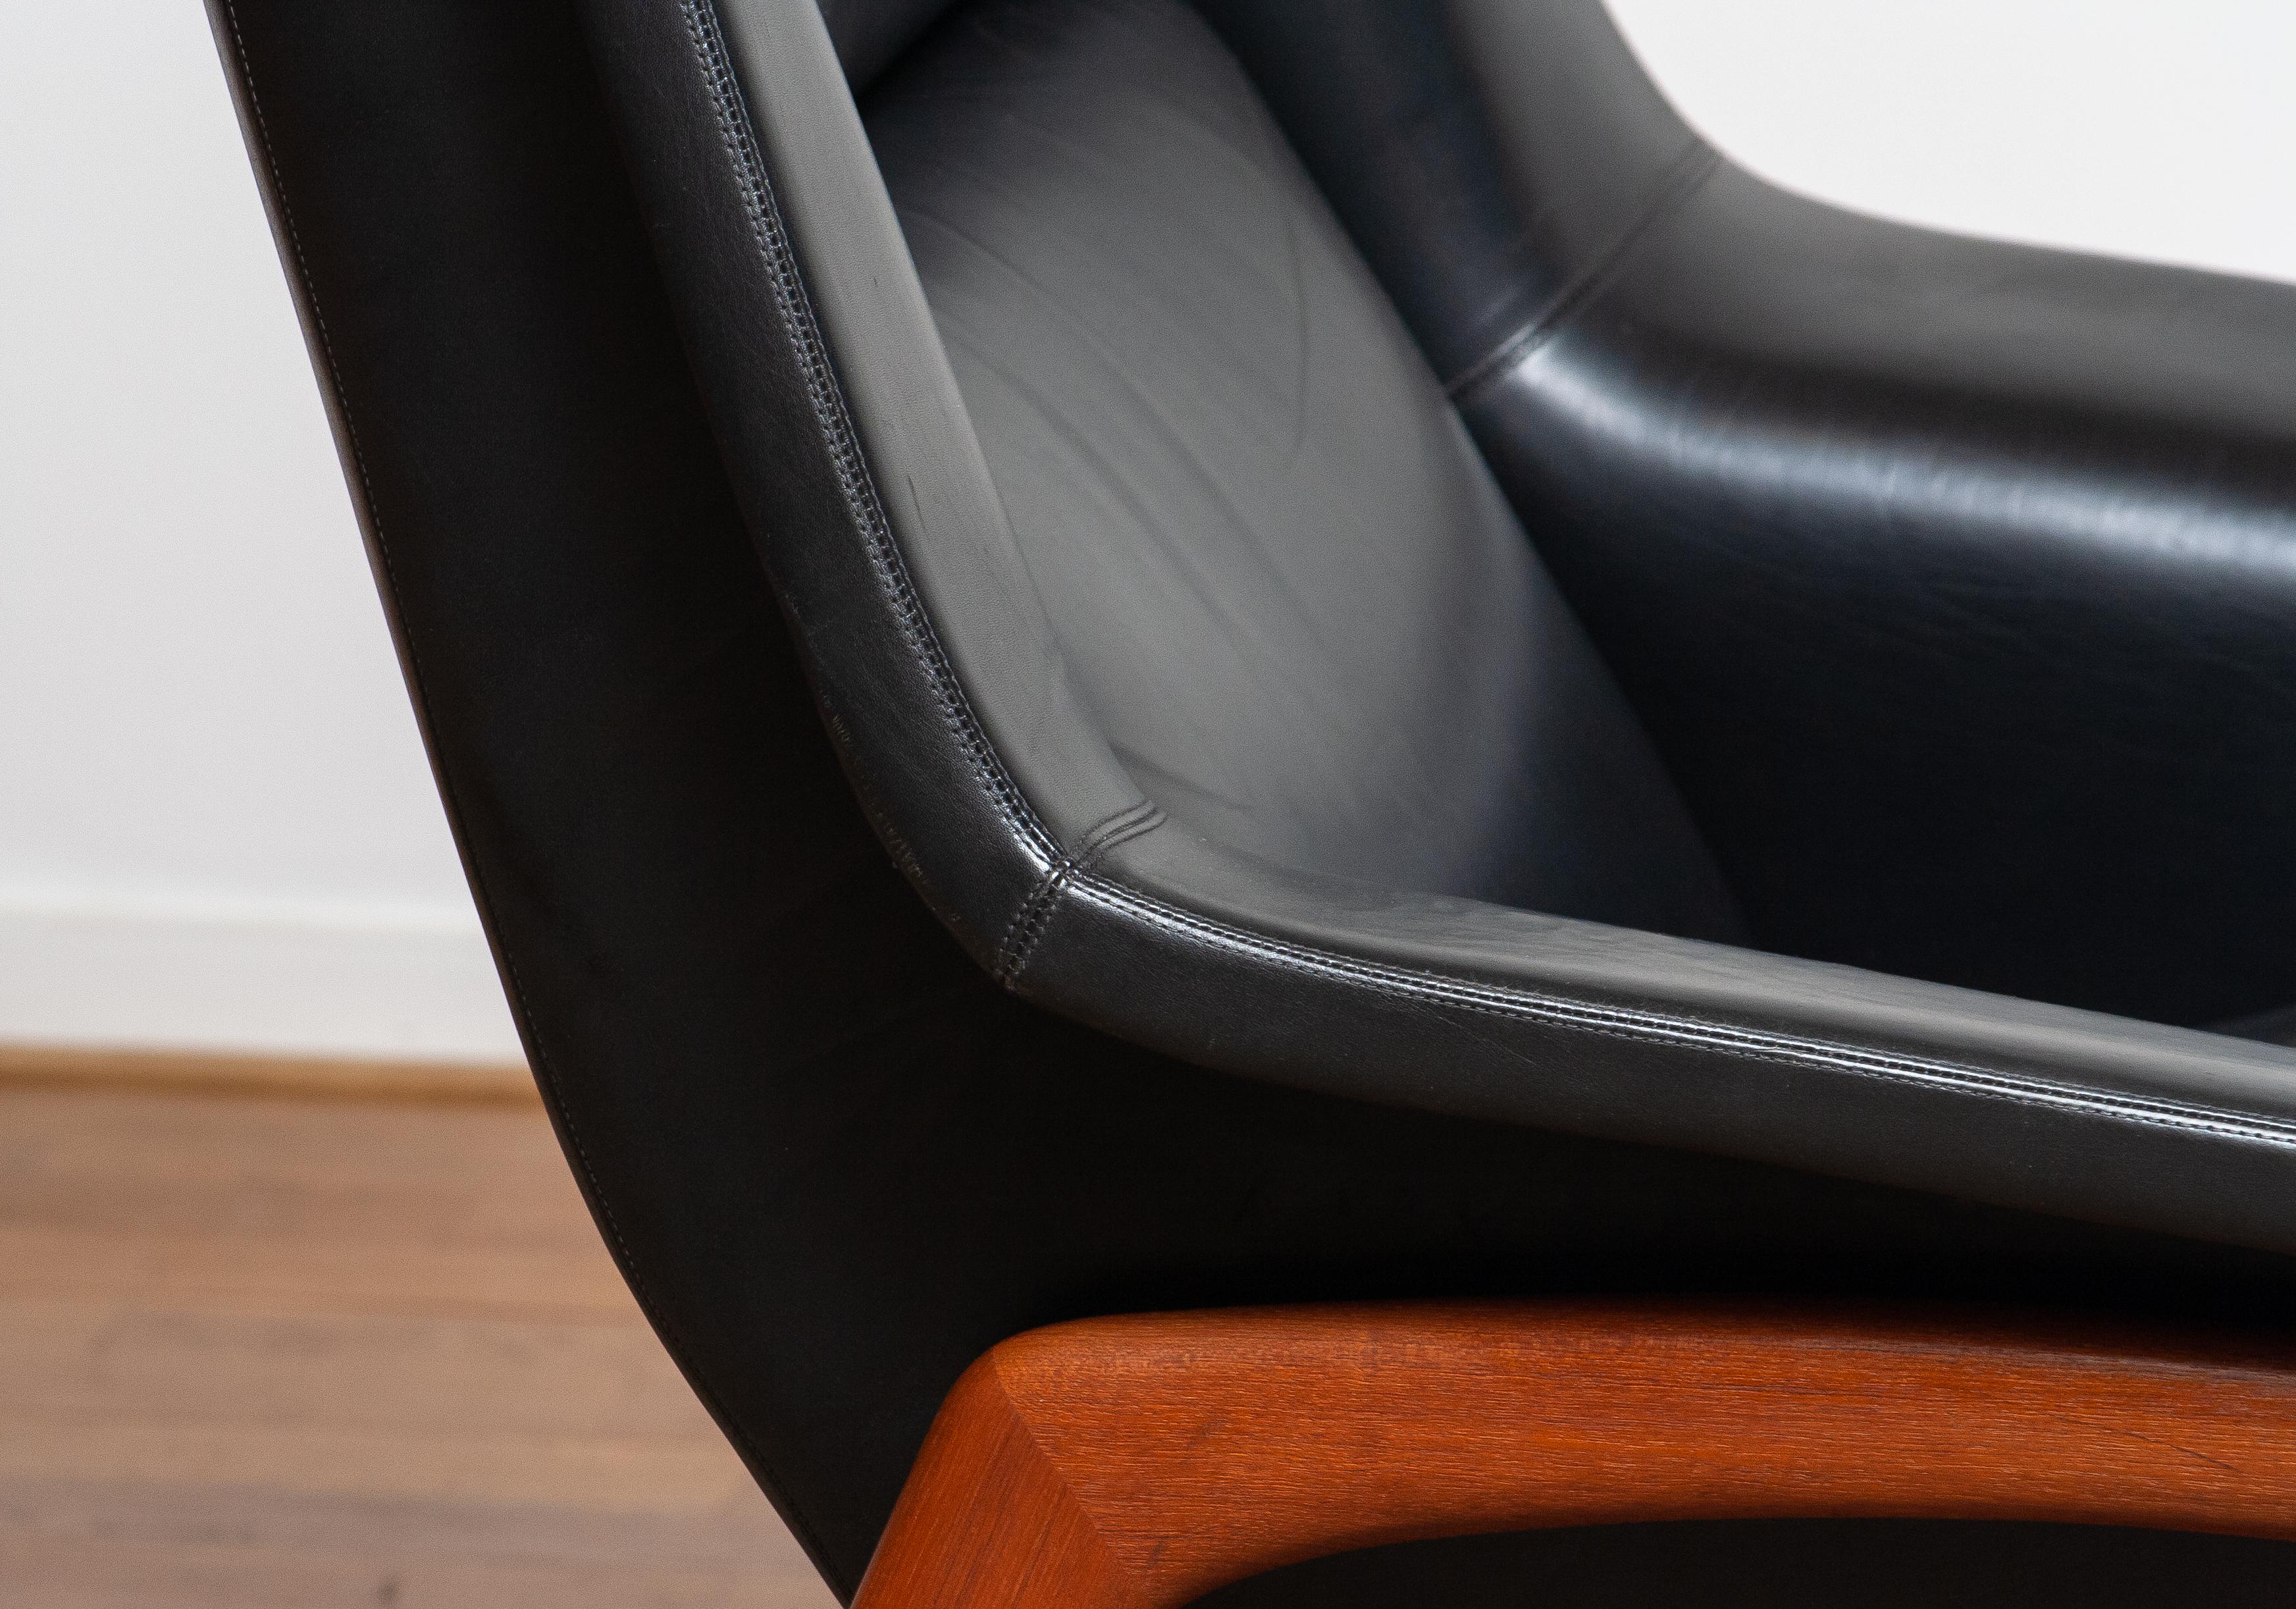 1960s, Lounge Chair 'Profil' by Folke Ohlsson for DUX in Black Leather and Teak In Good Condition In Silvolde, Gelderland